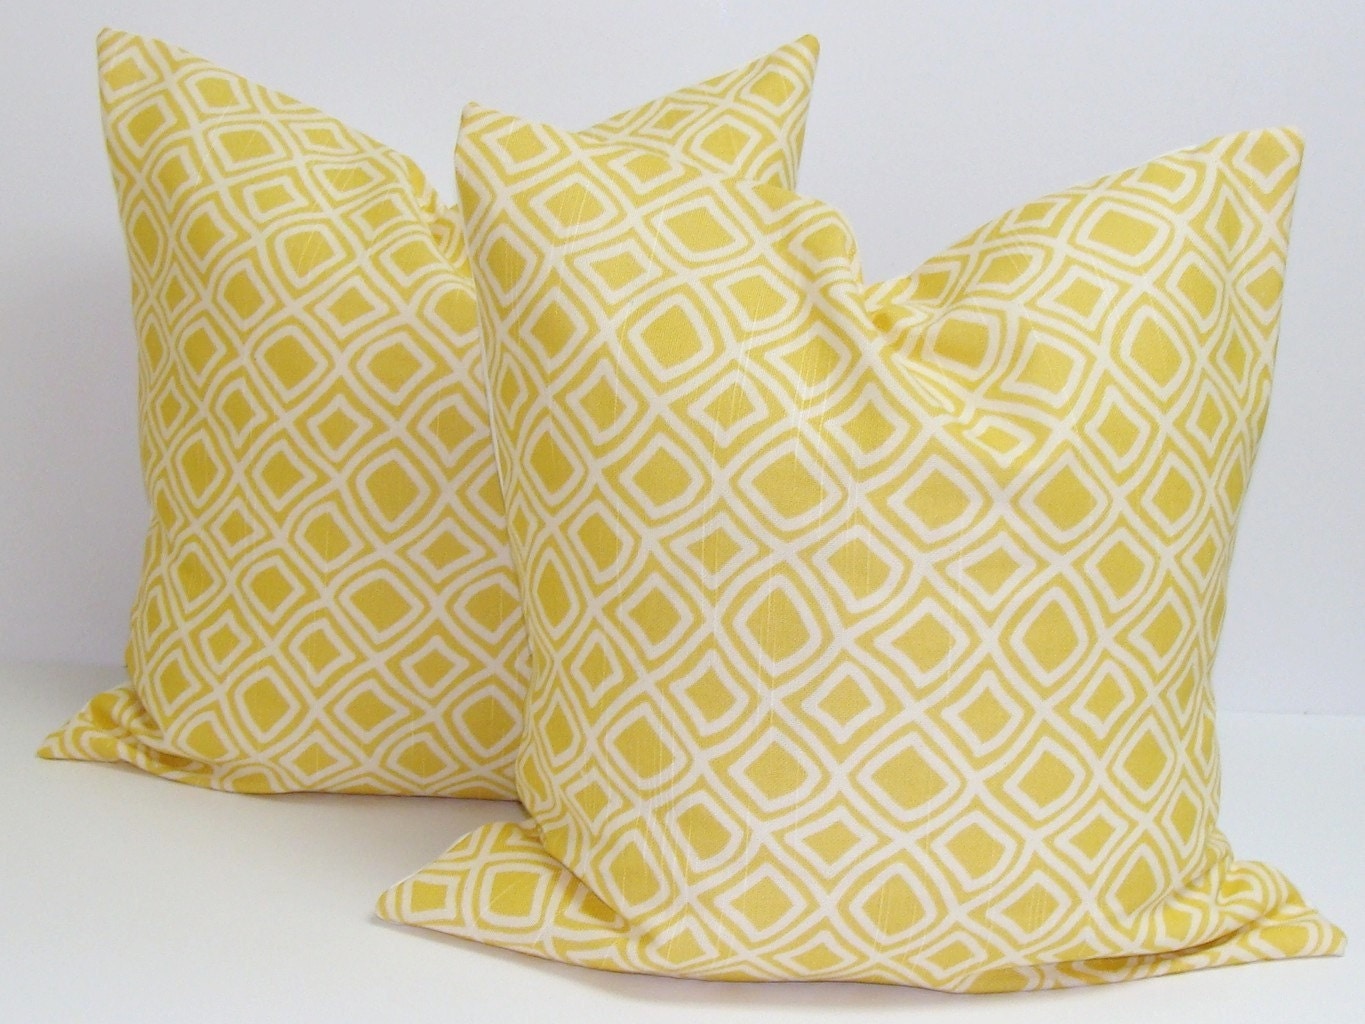 Yellow Decorative Pillow SET OF TWO16x16 by ElemenOPillows on Etsy